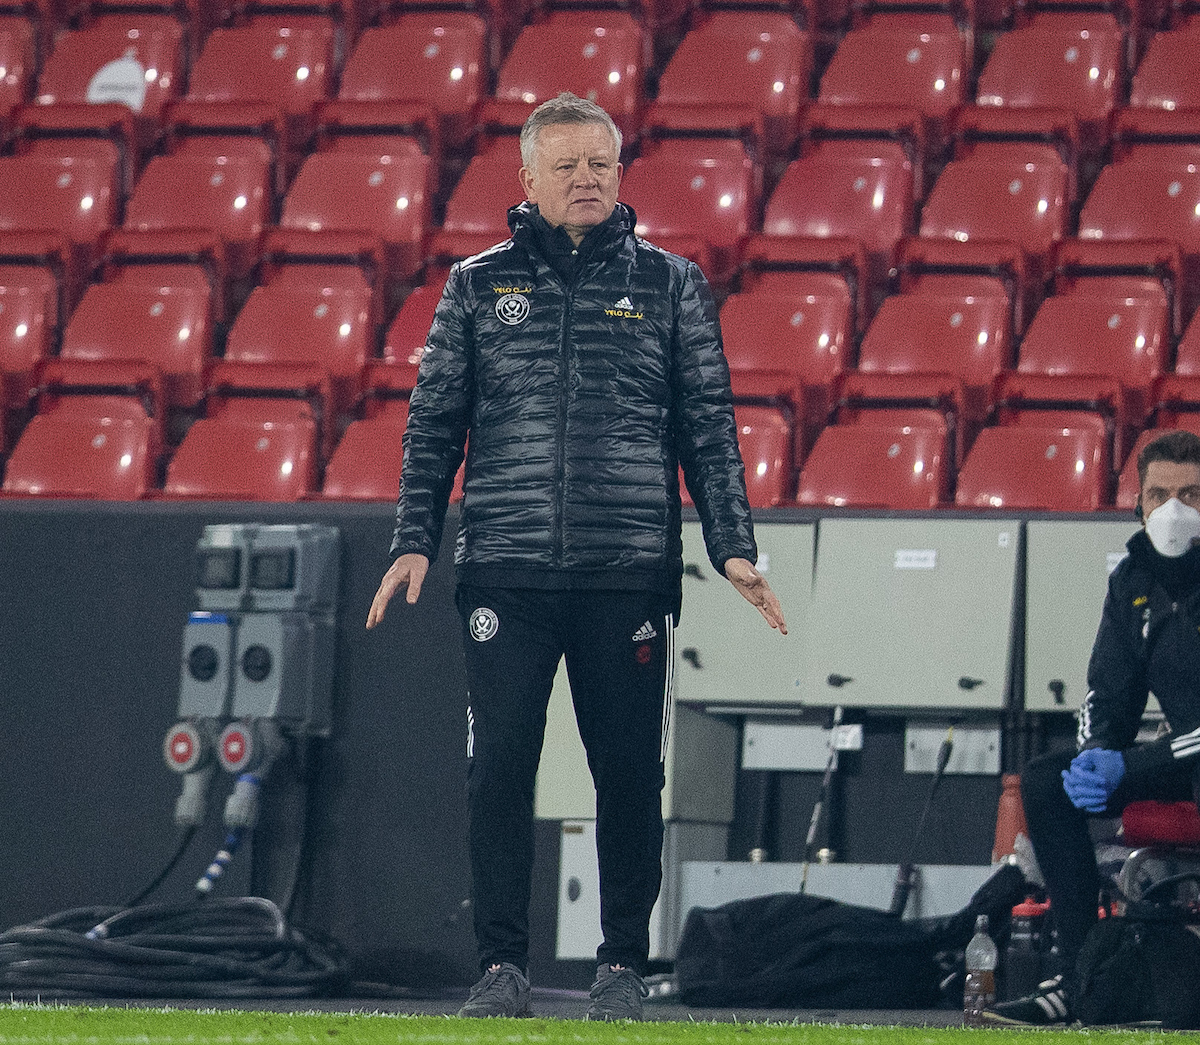 Sheffield United's manager Chris Wilder during the FA Premier League match between Sheffield United FC and Liverpool FC at Bramall Lane